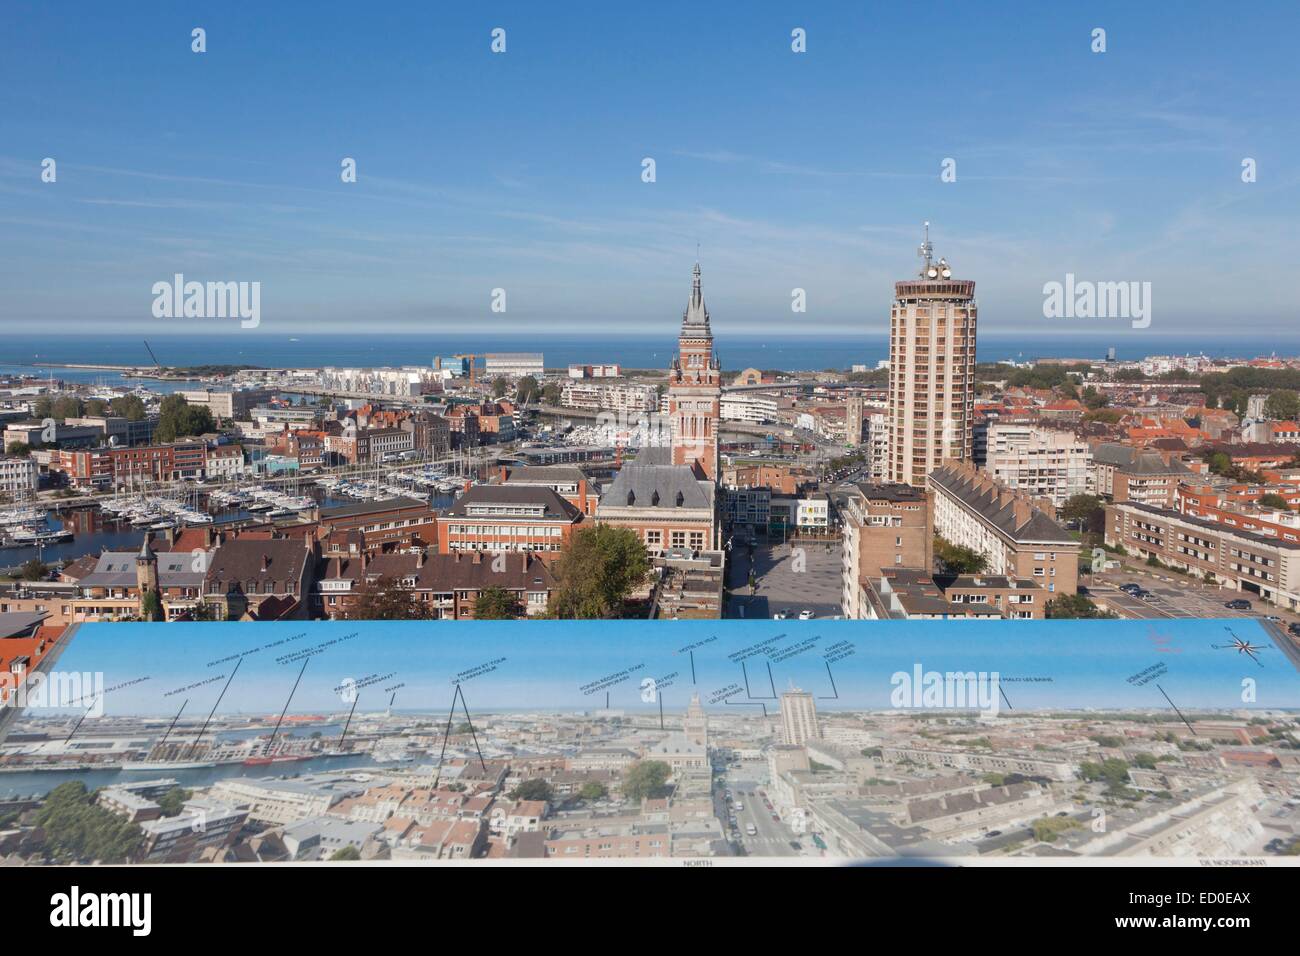 France, Nord, Dunkirk, view of the city, the belfry of the town hall listed as World Heritage by UNESCO and the North Sea Stock Photo